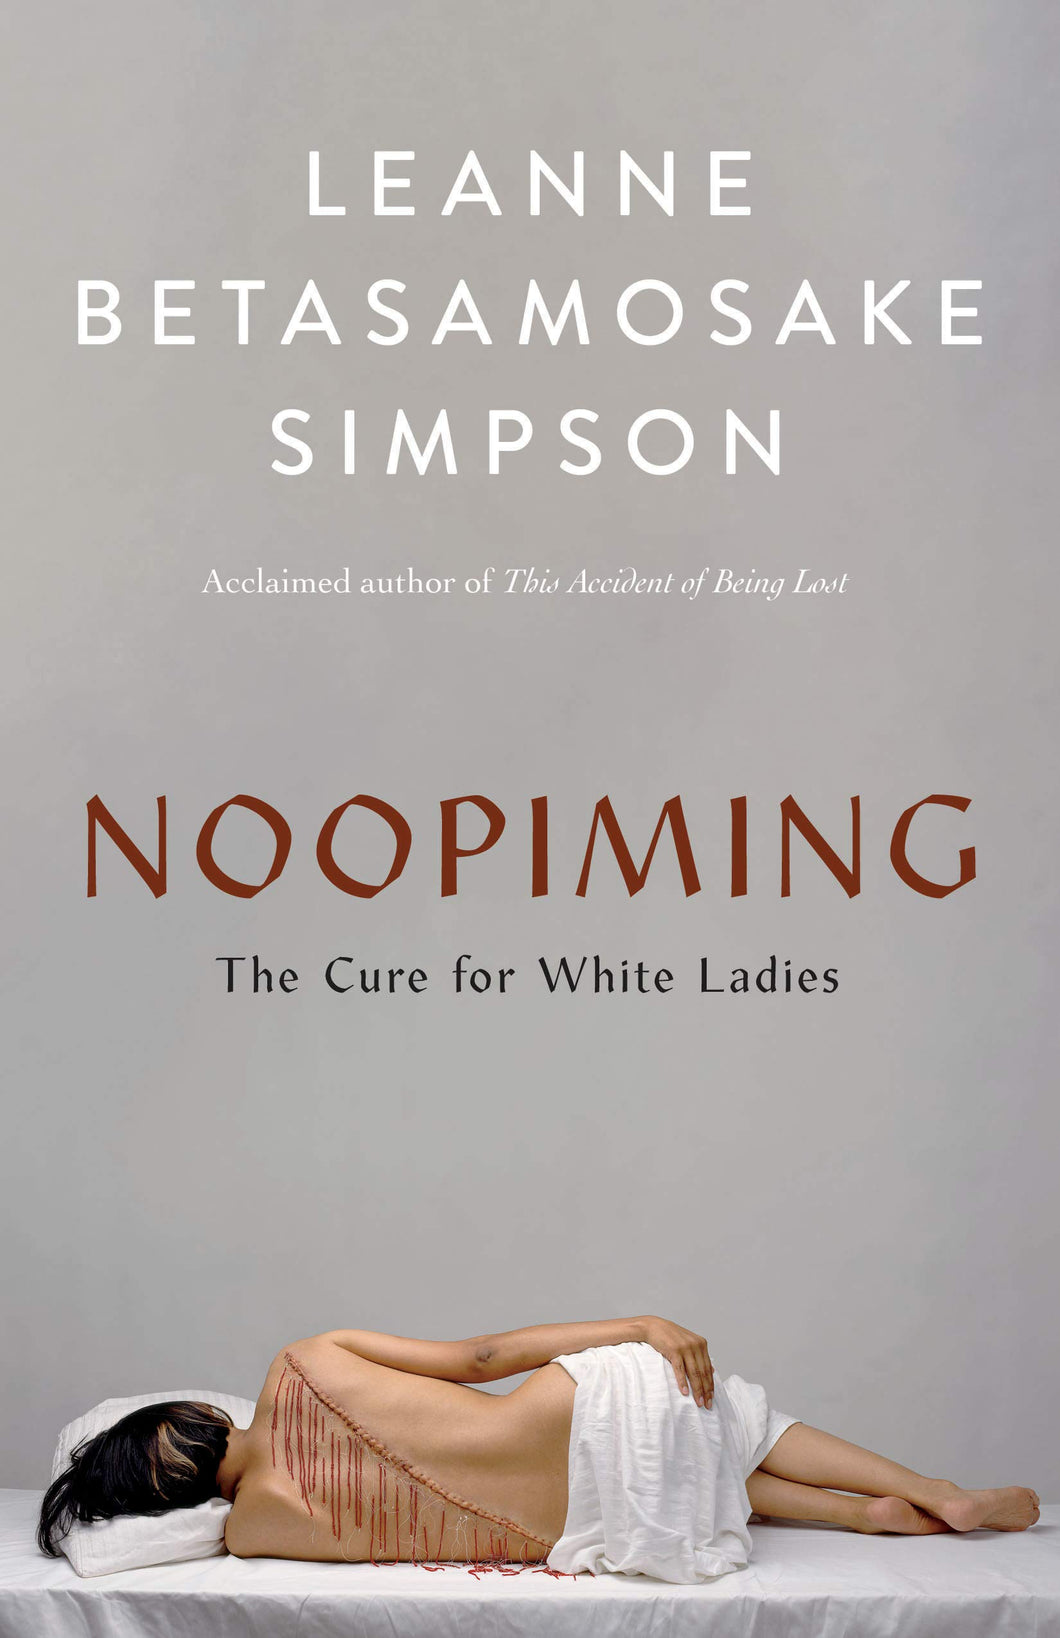 Noopiming: The Cure For White Ladies [Leanne Betasamosake Simpson]